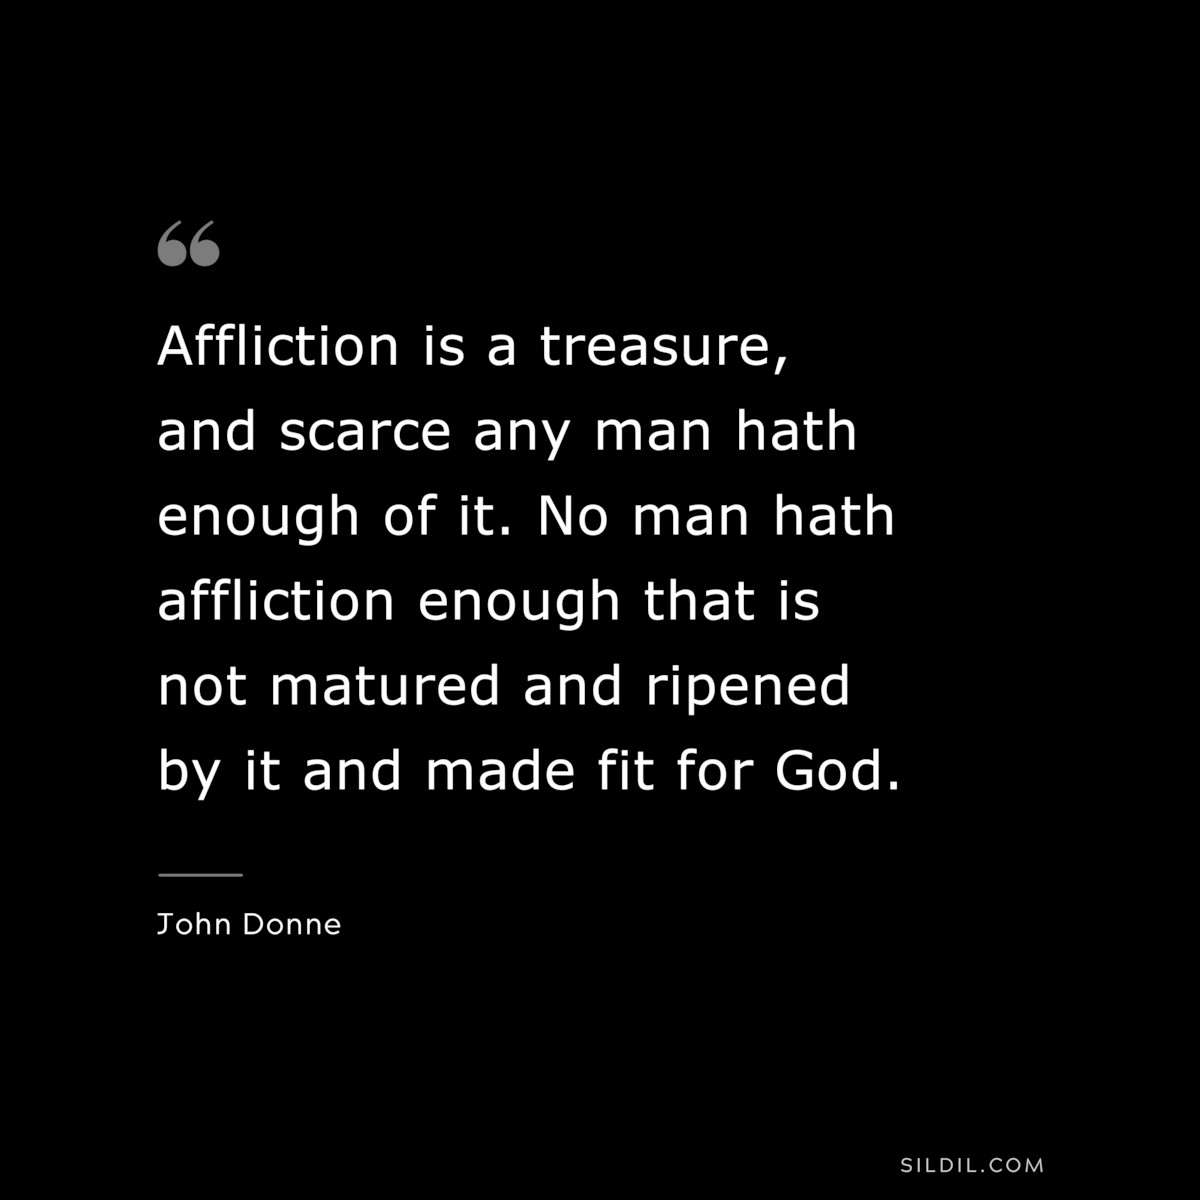 Affliction is a treasure, and scarce any man hath enough of it. No man hath affliction enough that is not matured and ripened by it and made fit for God. ― John Donne